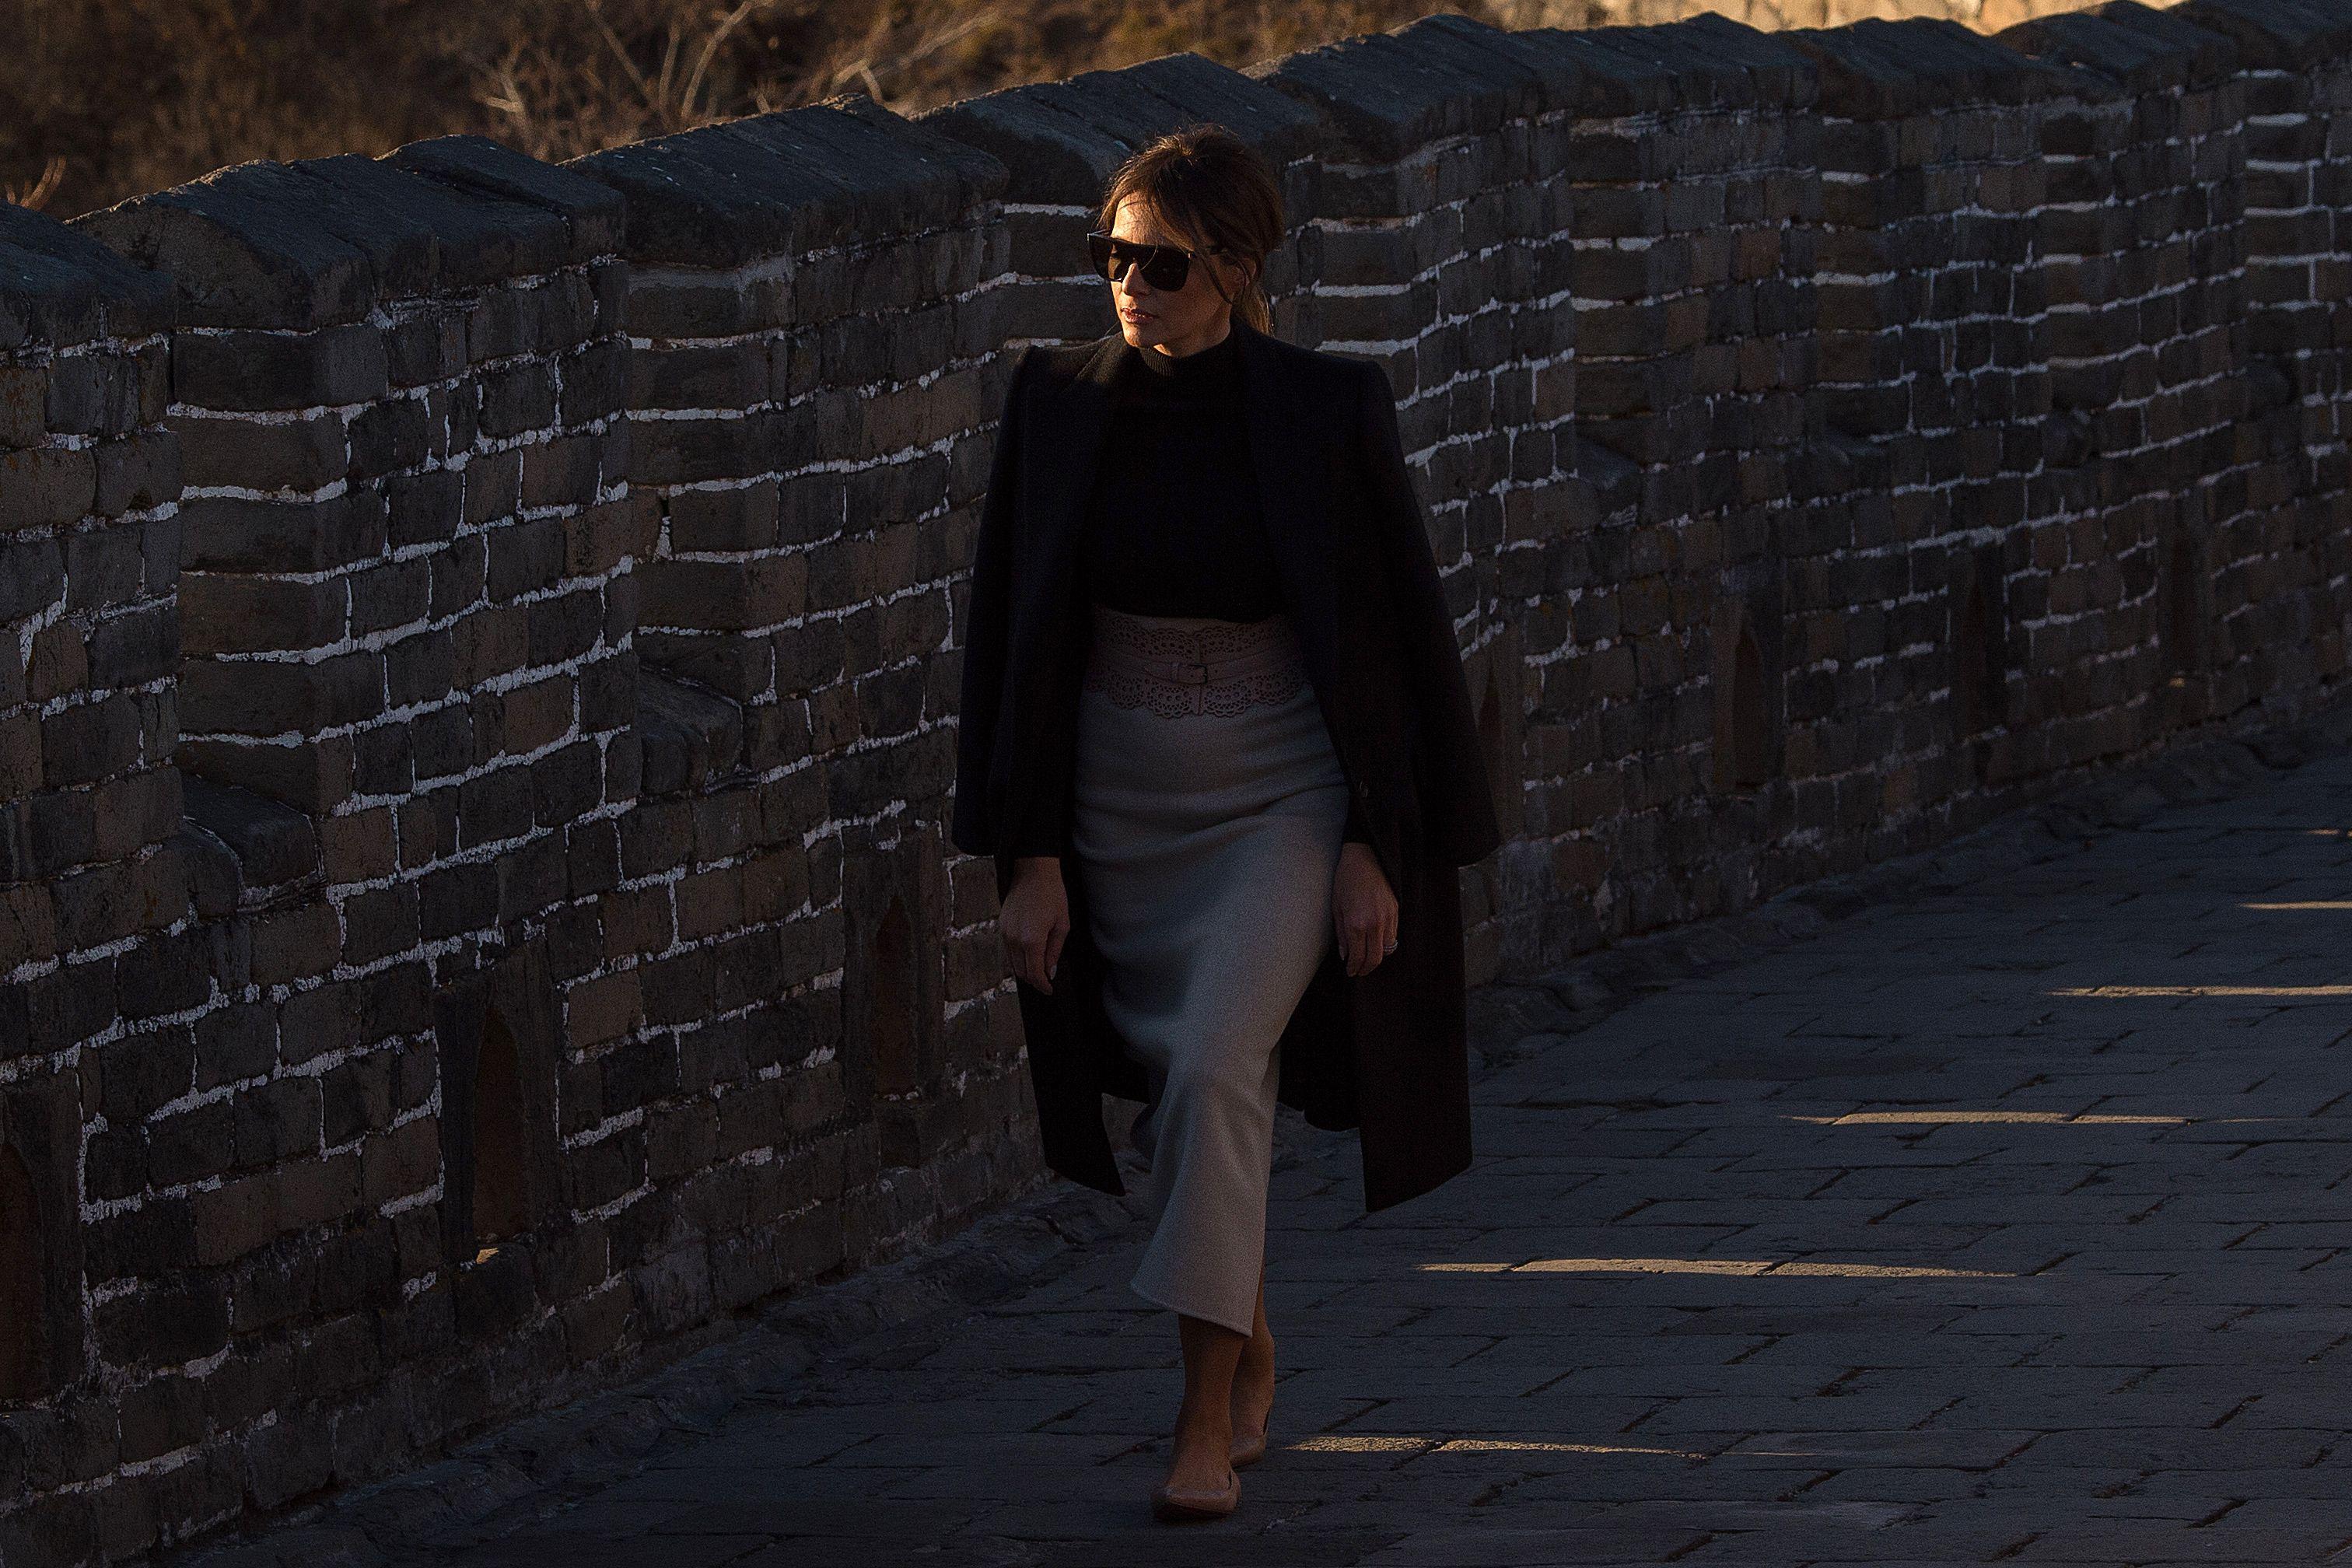 US First Lady Melania Trump walks on the Great Wall of China on the outskirts of Beijing on November 10, 2017. / AFP PHOTO / Nicolas ASFOURI        (Photo credit should read NICOLAS ASFOURI/AFP/Getty Images)